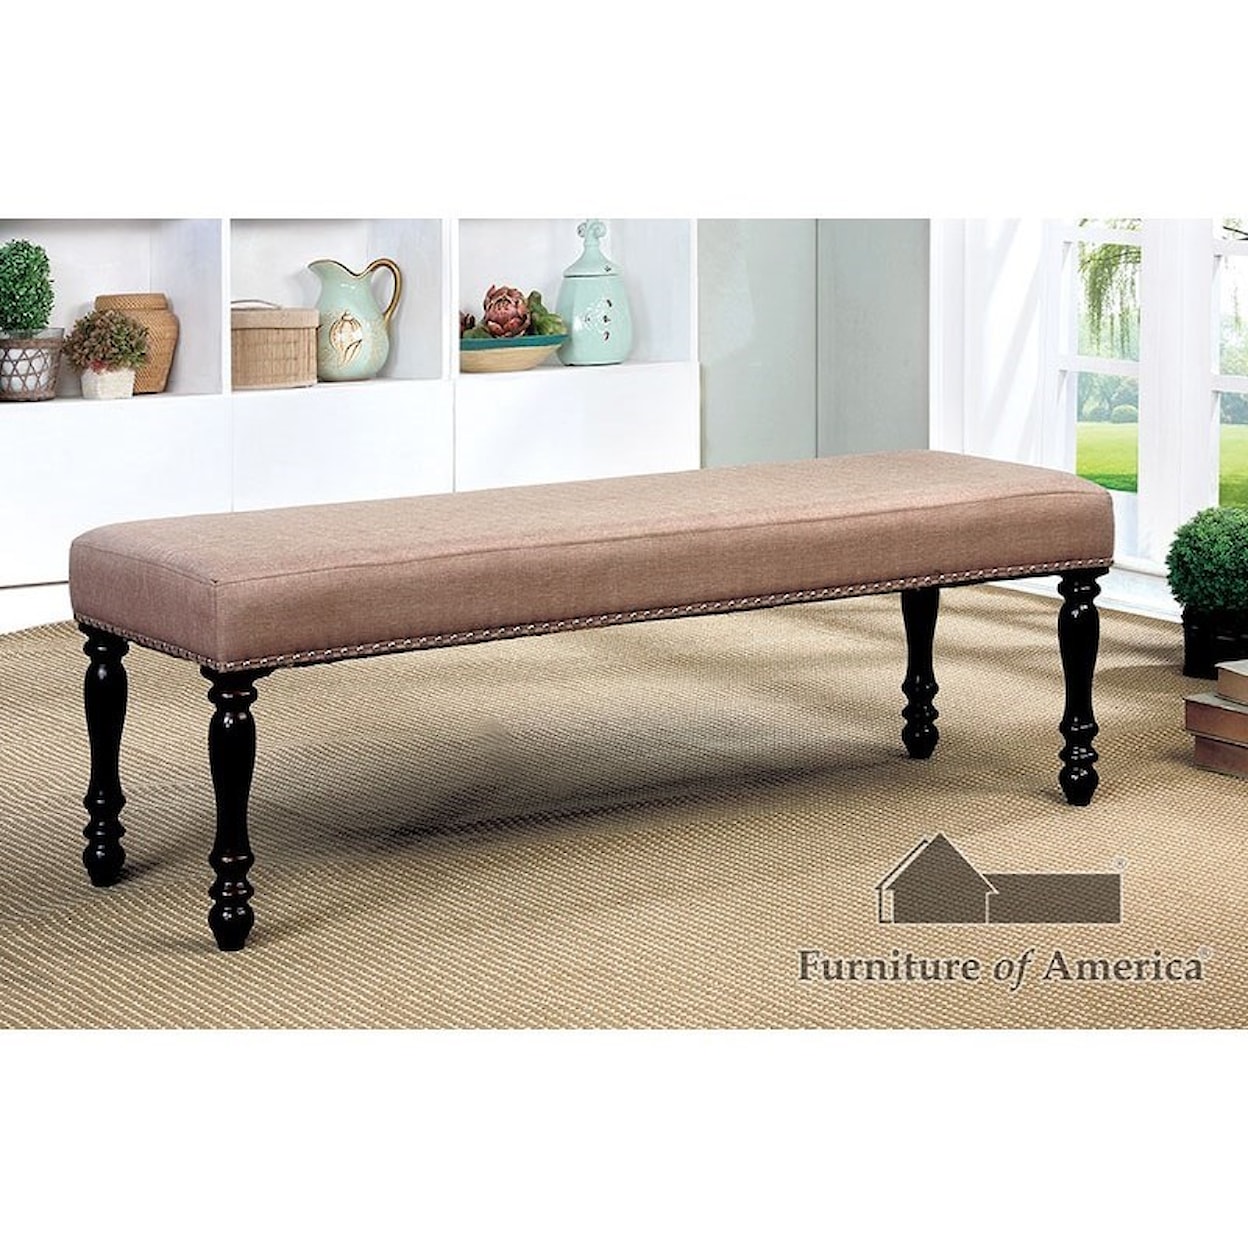 Furniture of America Holcroft Bench